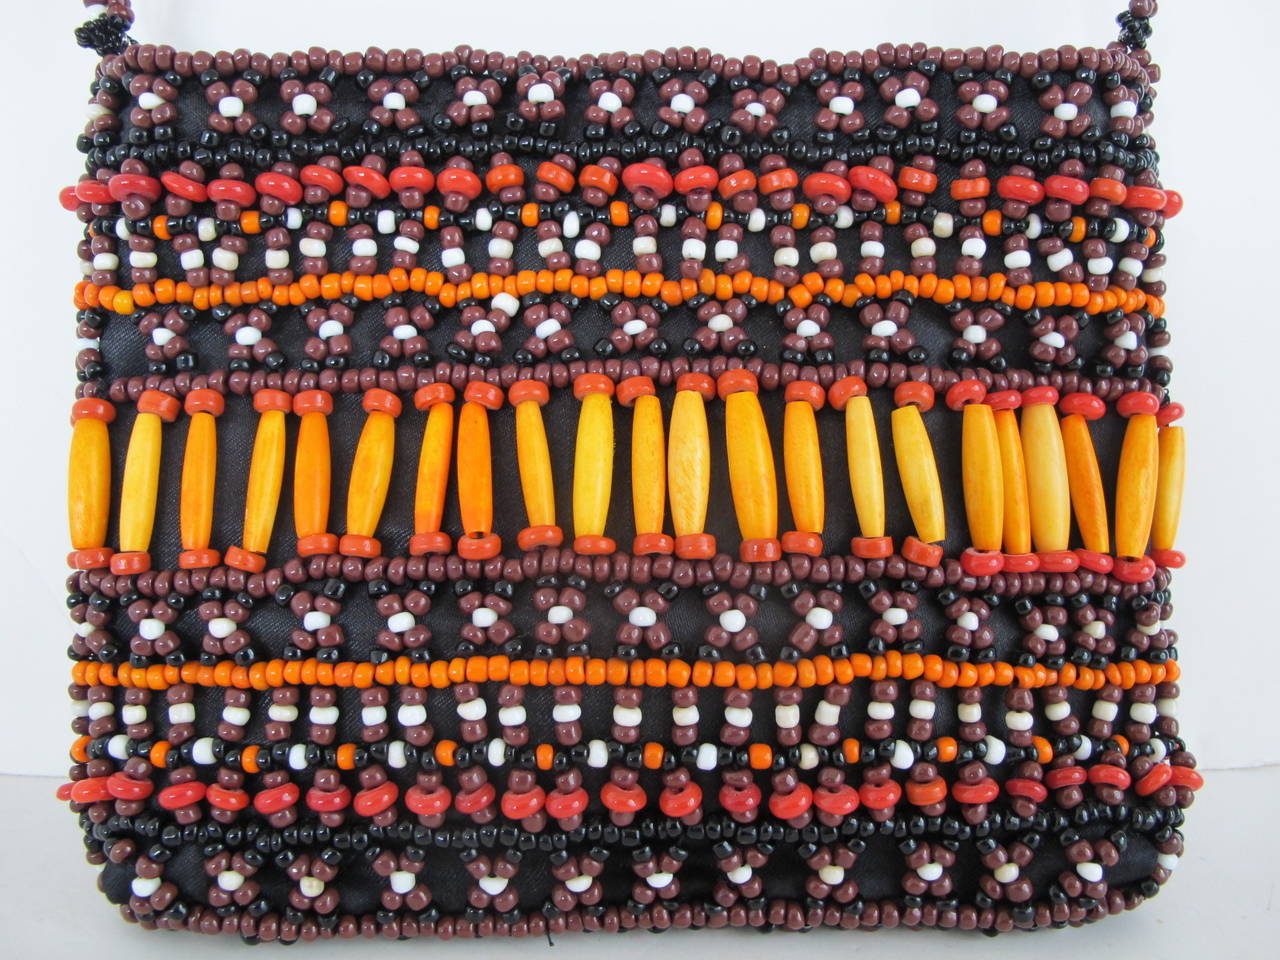 This African purse is created from African wooden and glass beads. It was donated to Helpers by San Francisco's iconic store: Wilkes Bashford. Original price of handbag was $865.00. The beads are hand sewn to bag.